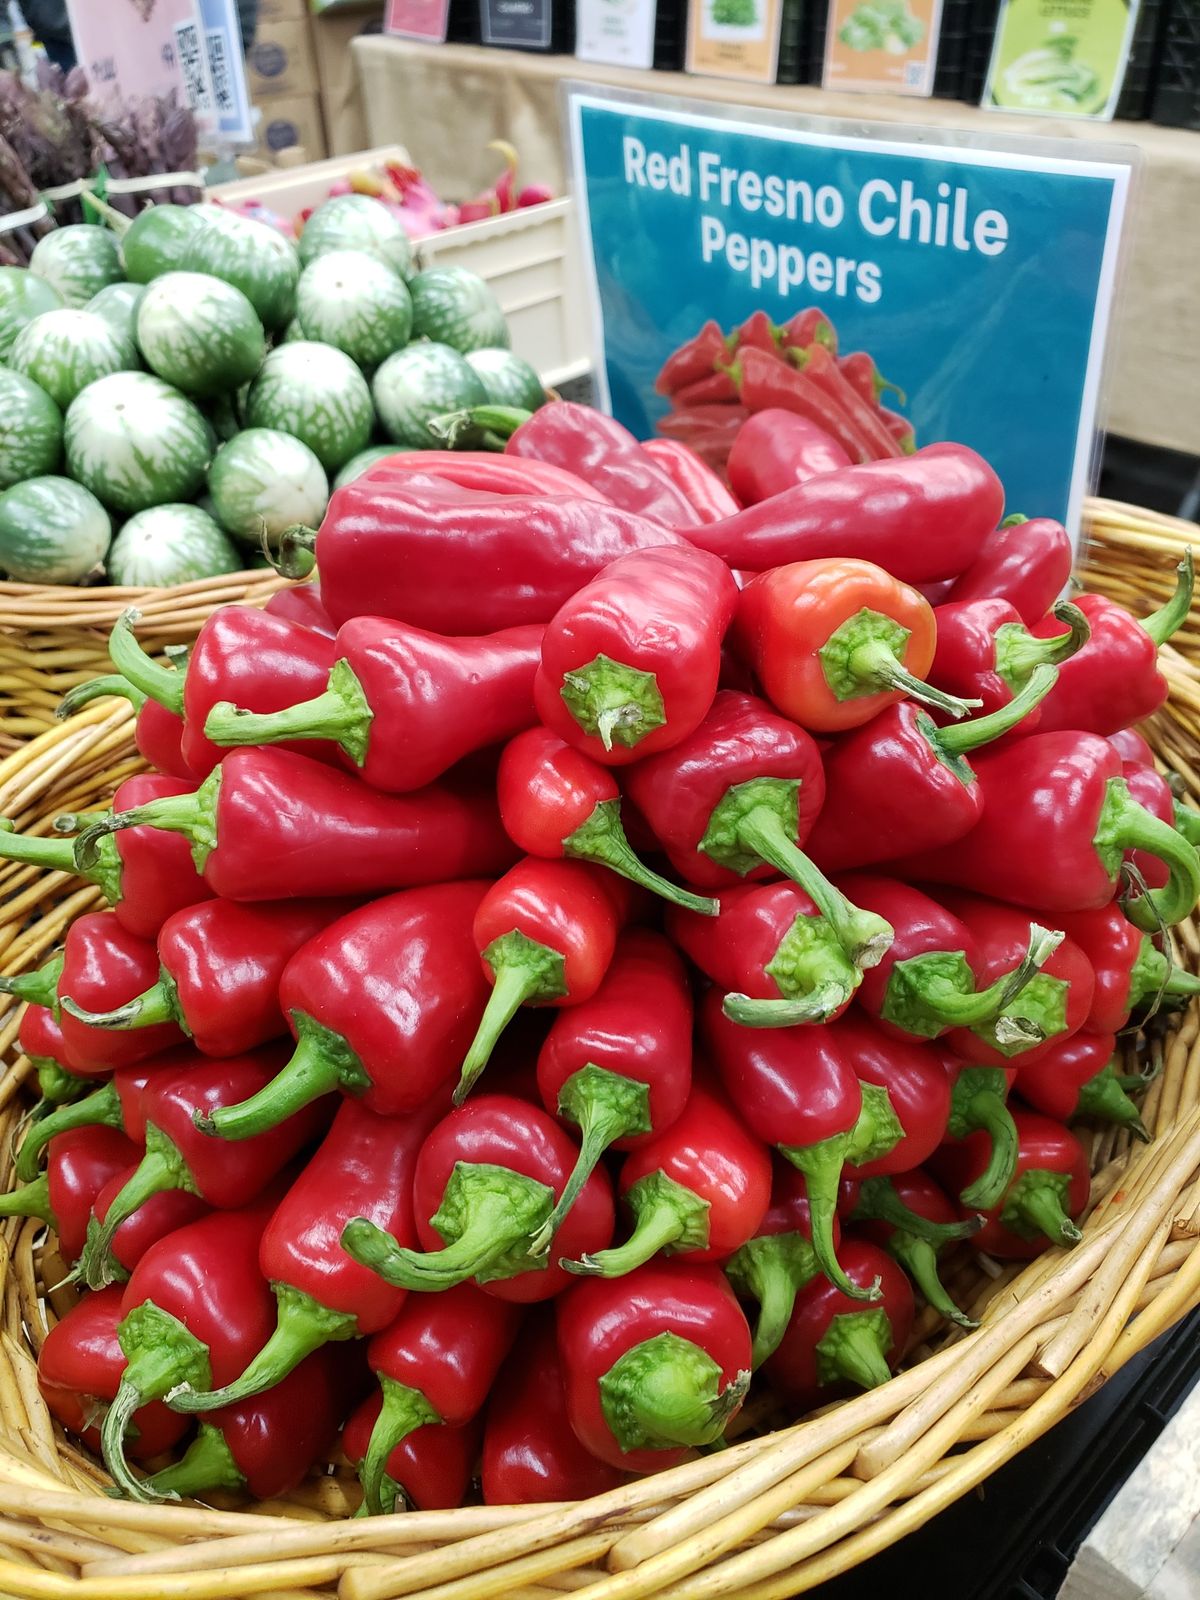 Punainen Fresno Chile Peppers